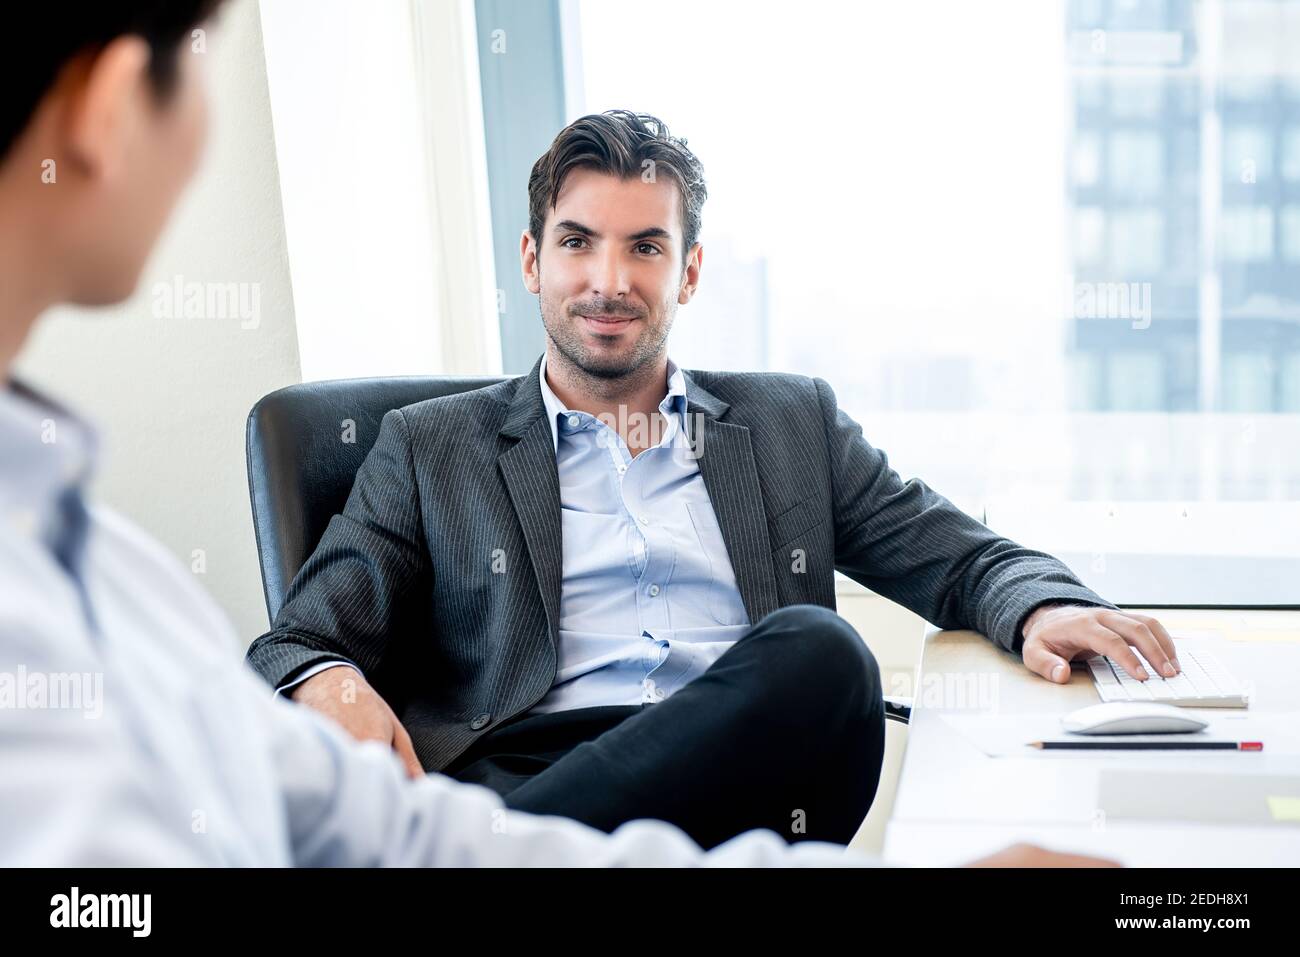 Handsome Hispanic businessman as a boss sitting in a chair listening to his colleague in the office Stock Photo